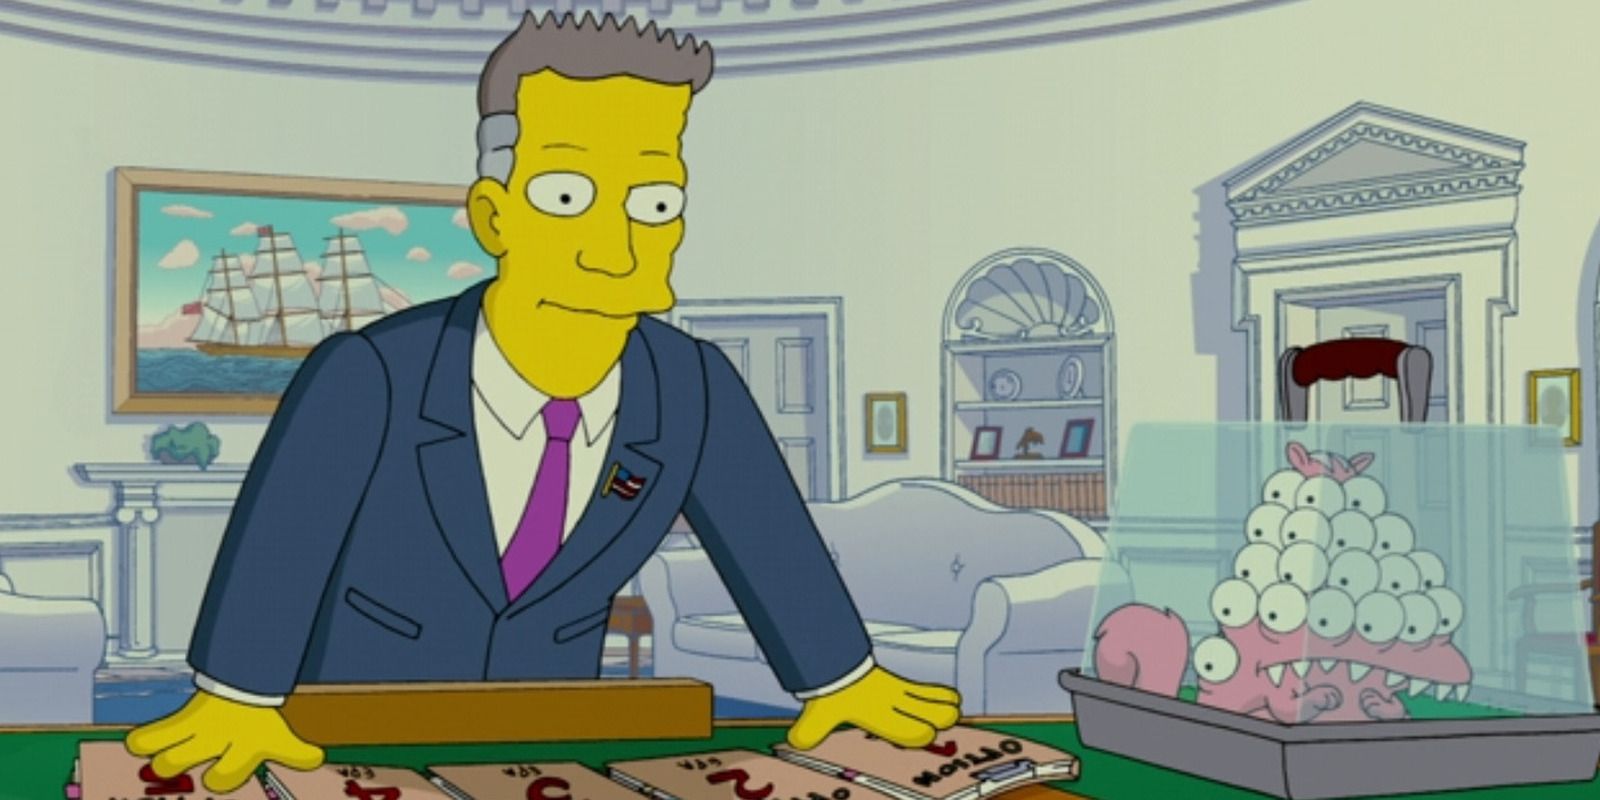 The Simpsons Russ Cargill in the Oval Office with files spread on the President's desk and a multi-eyed squirrel